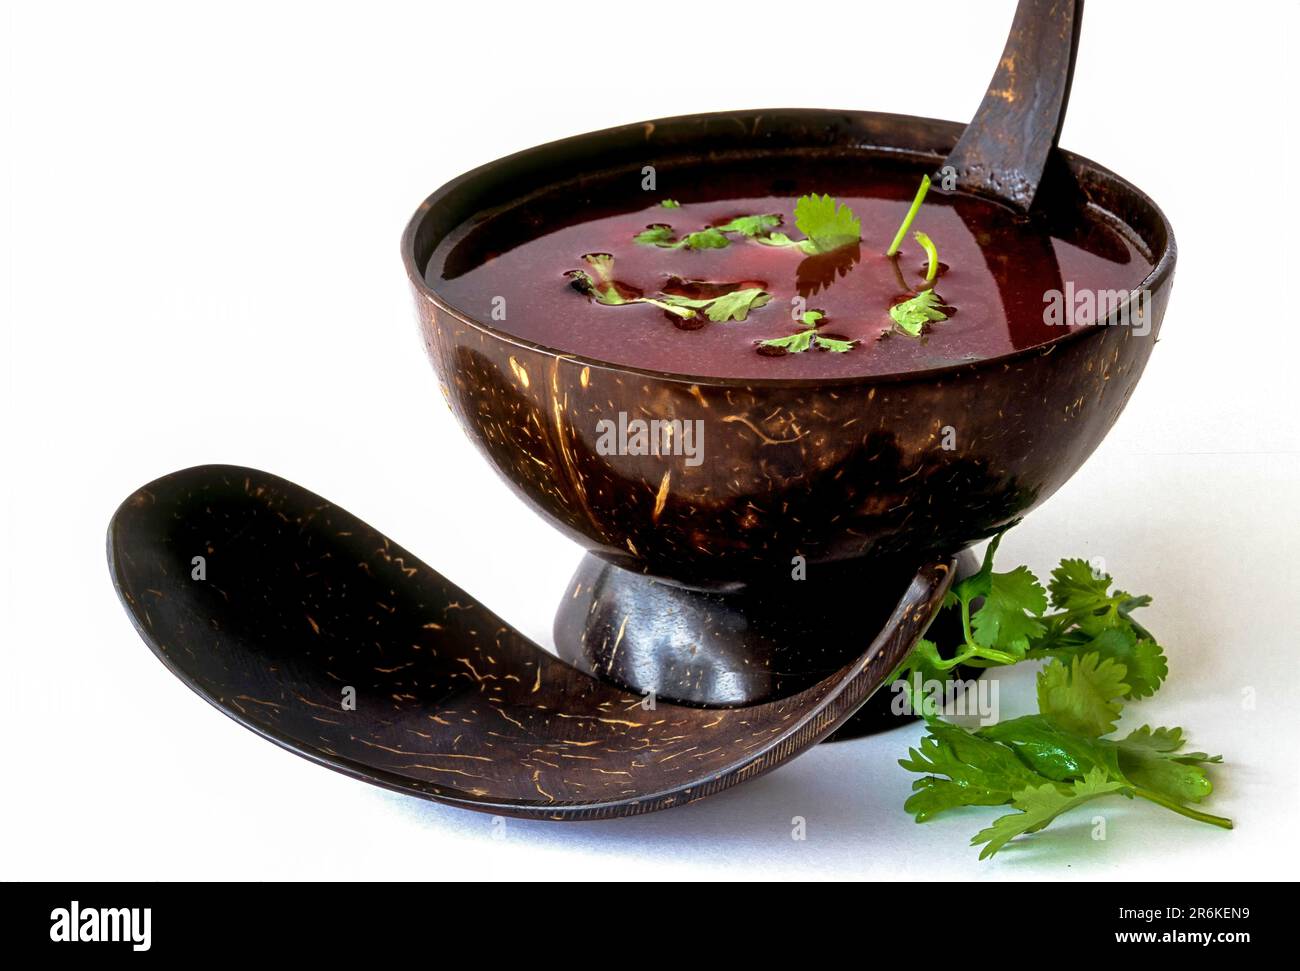 Beetroot soup in an environment friendly coconut shell cup, Tamil Nadu, South India, India, Asia Stock Photo